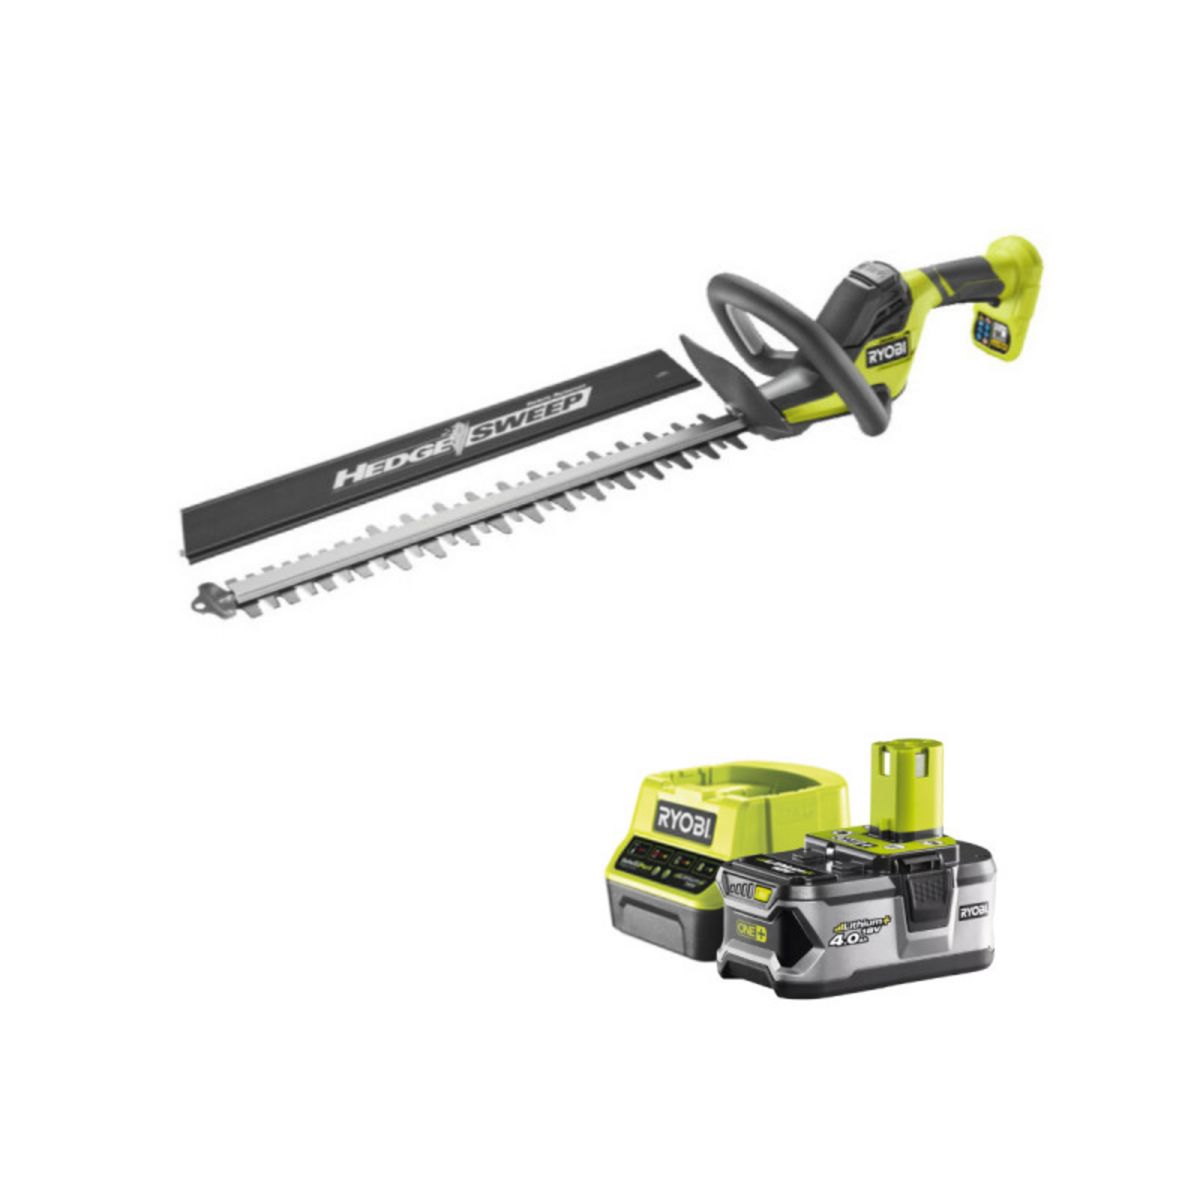 Ryobi Pack RYOBI Taille-haies 18V OnePlus Brushless LINEA 45 cm RY18HT45A-0 - 1 Batterie 4.0Ah - 1 Charge